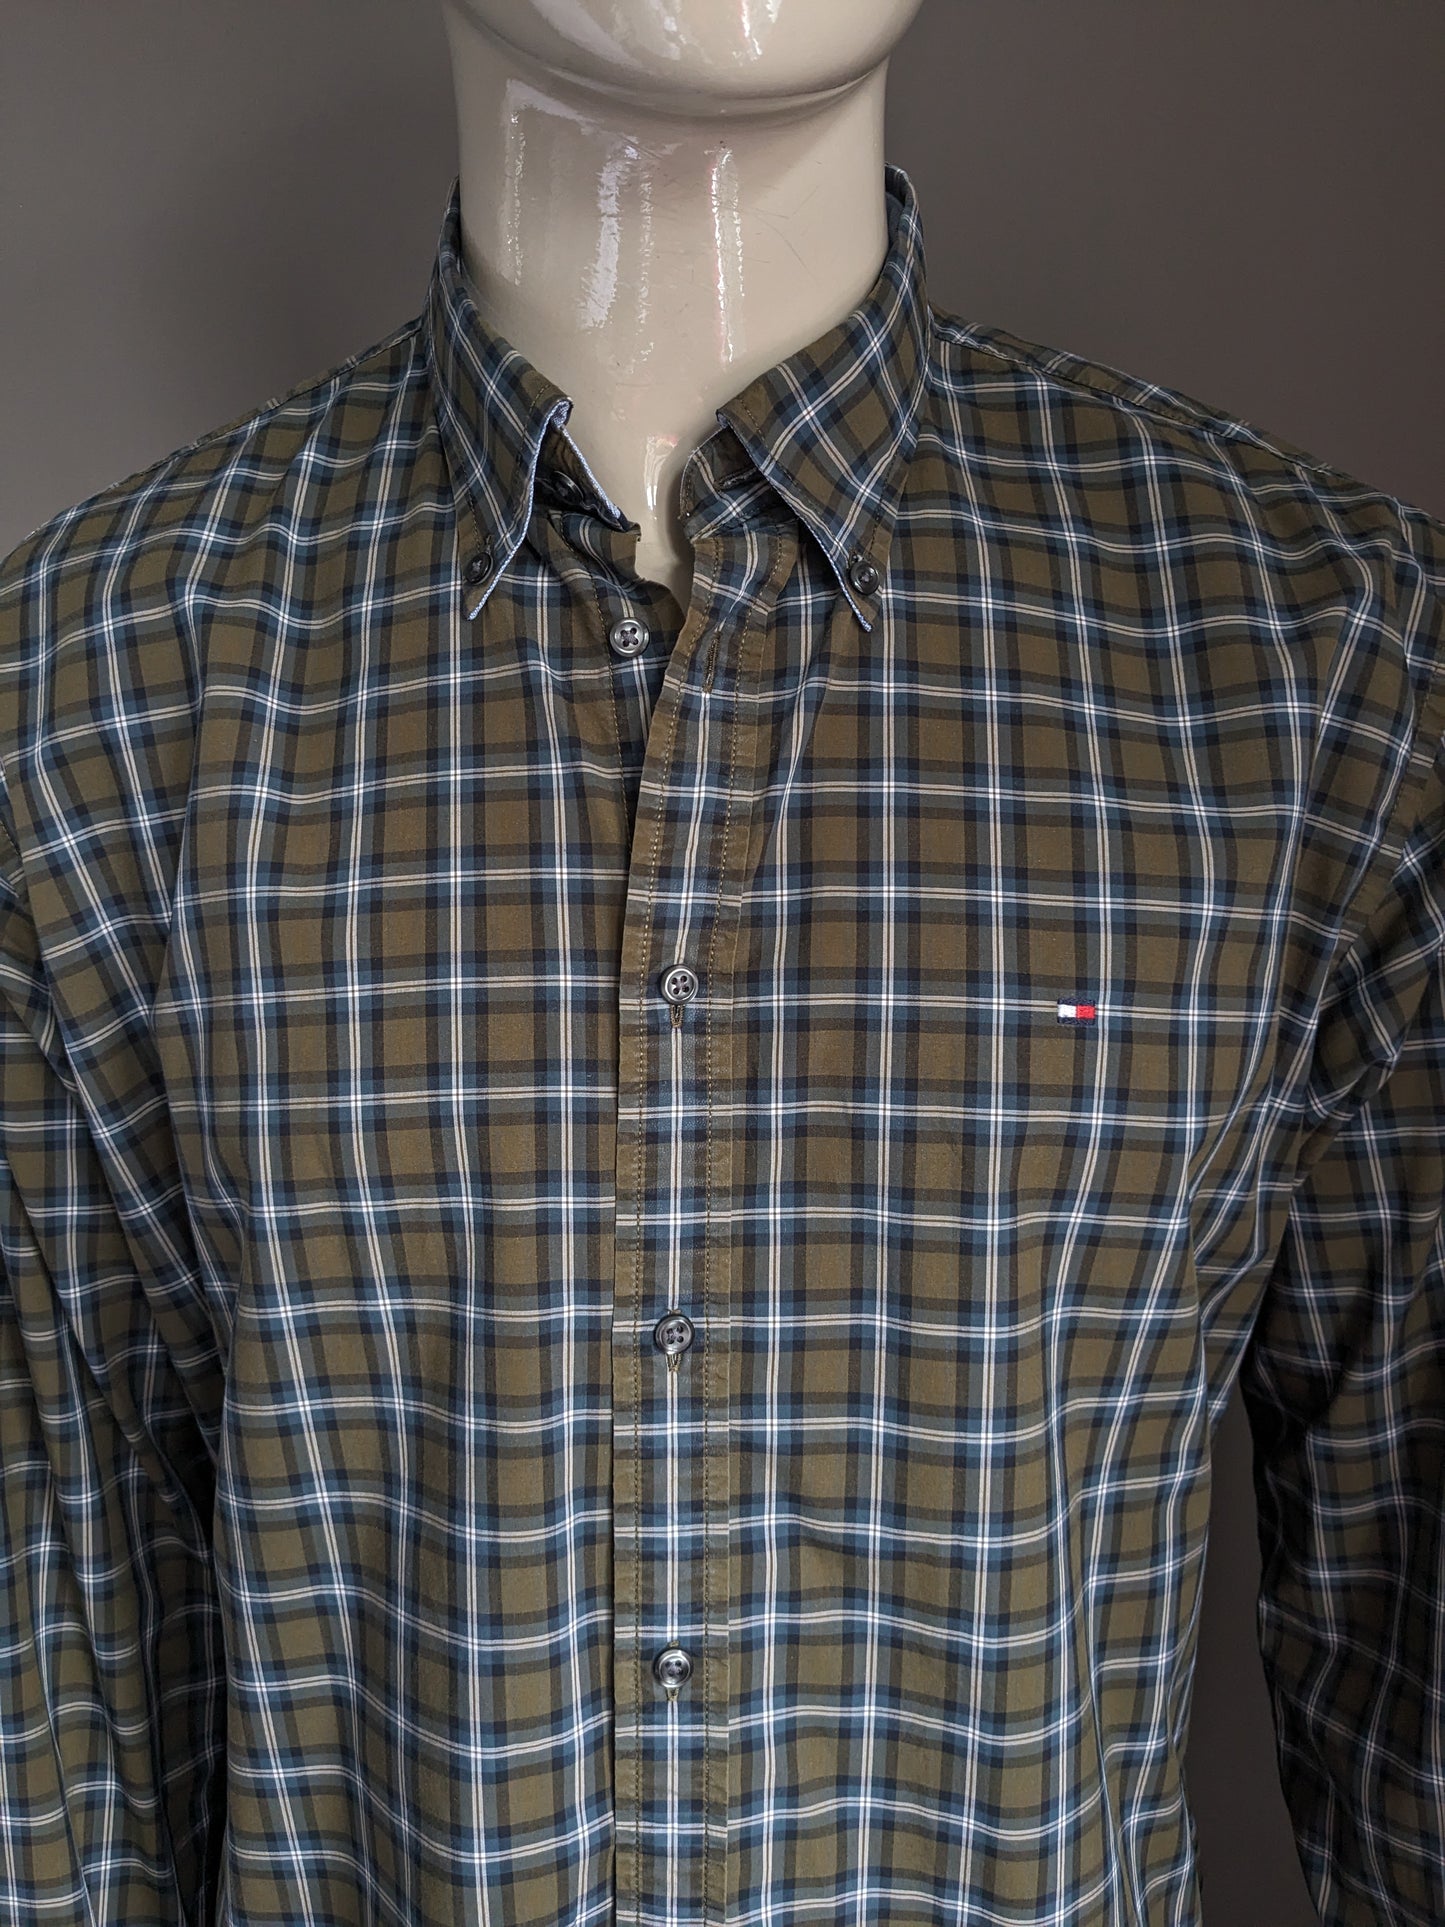 Tommy Hilfiger shirt. Green blue white checkered. Size XL. Custom fit.